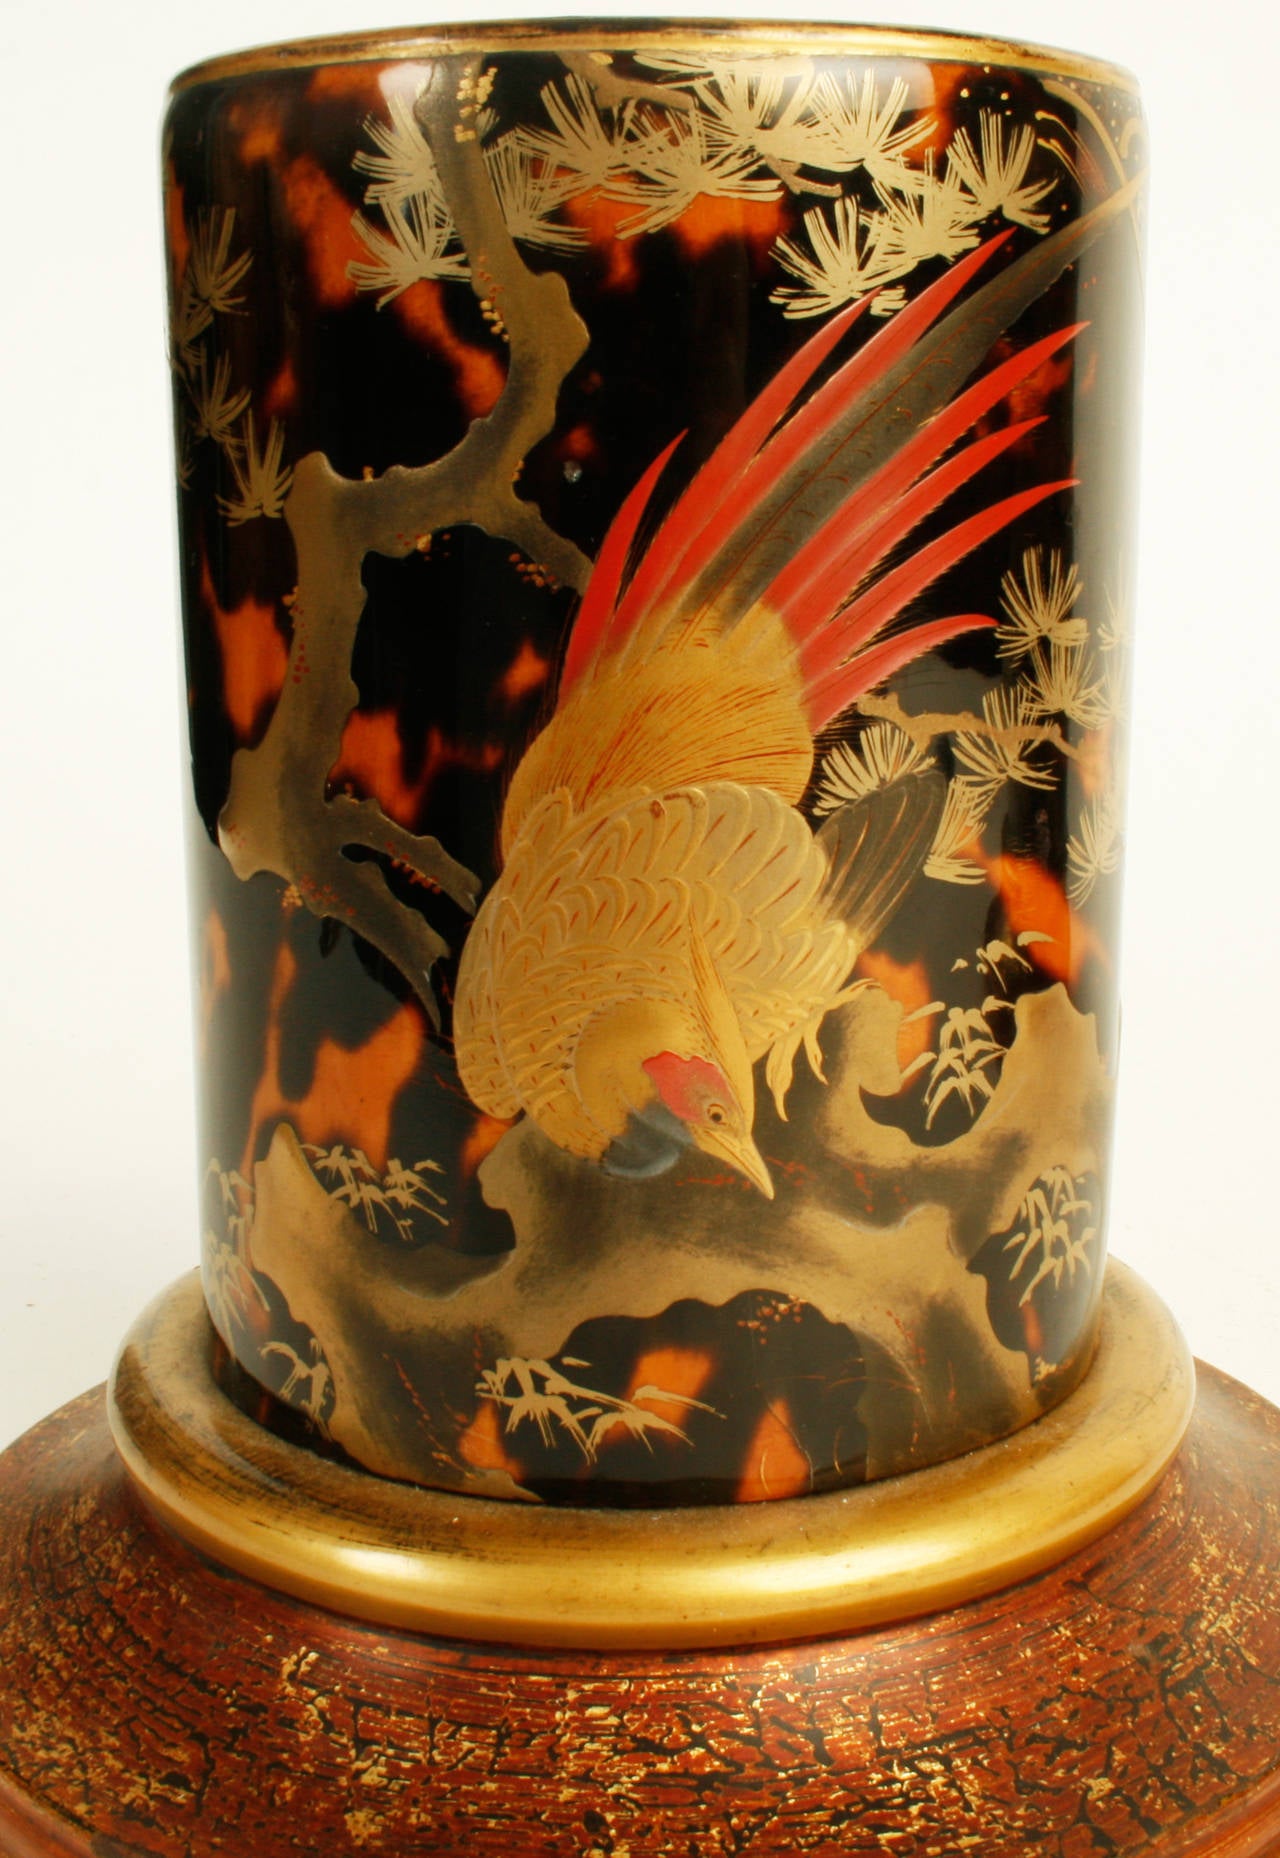 This pair of Japanese brush pots are made with beautiful tortoiseshel. One is decorated with gilt Chinese peacocks with mother-of-pearl “eyes” in their tail feathers. The other has a Chinese pheasant. An exotic pair to display anywhere.
N.P. Trent